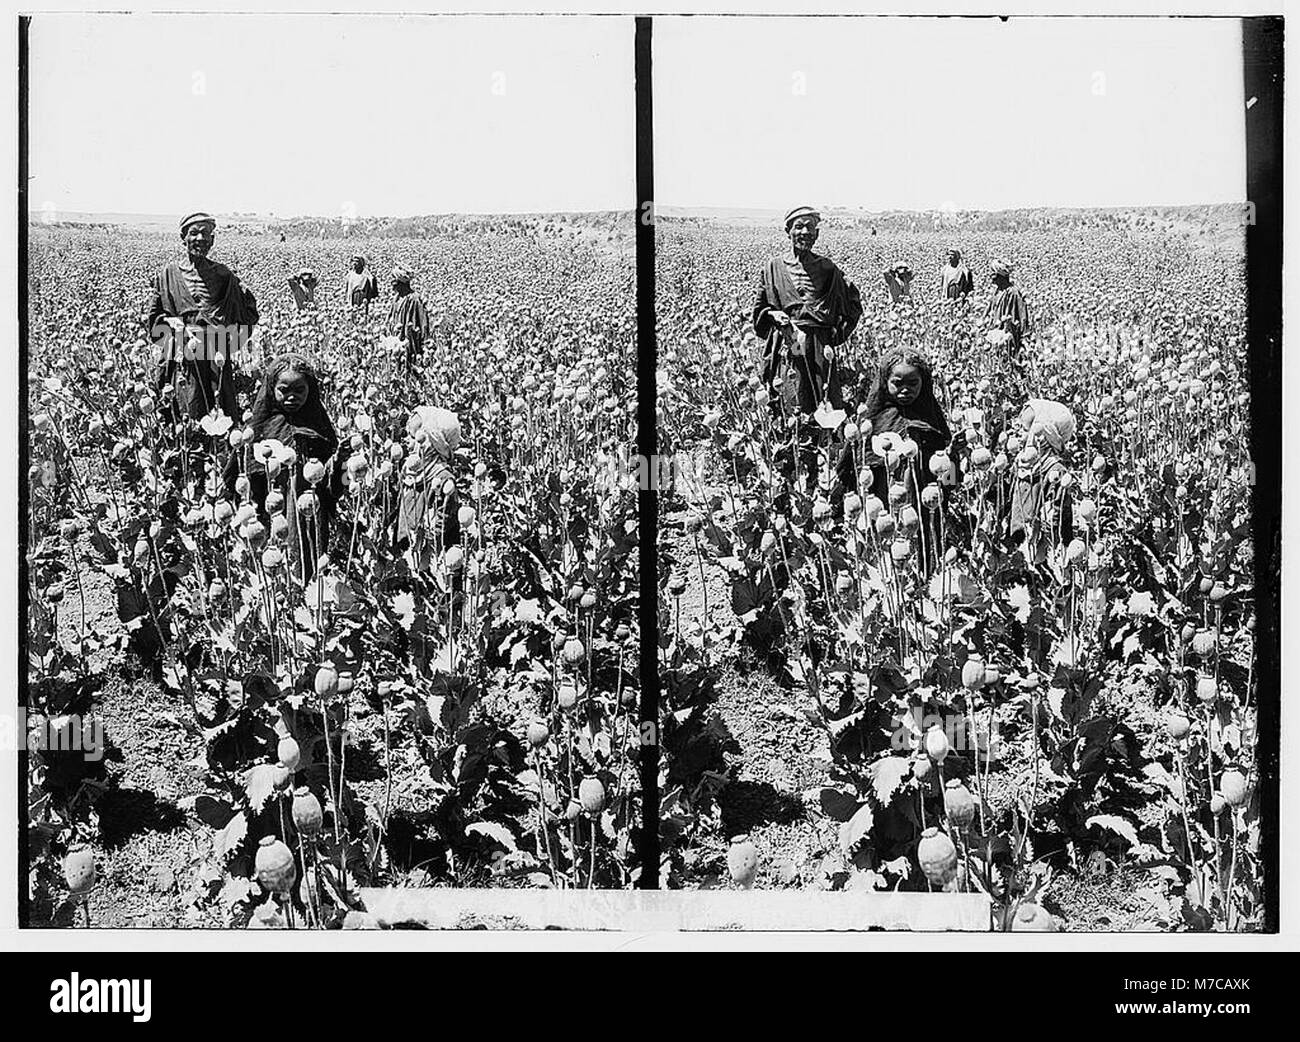 Egyptian characters, etc. Gathering opium from seed pods of the poppy LOC matpc.01607 Stock Photo